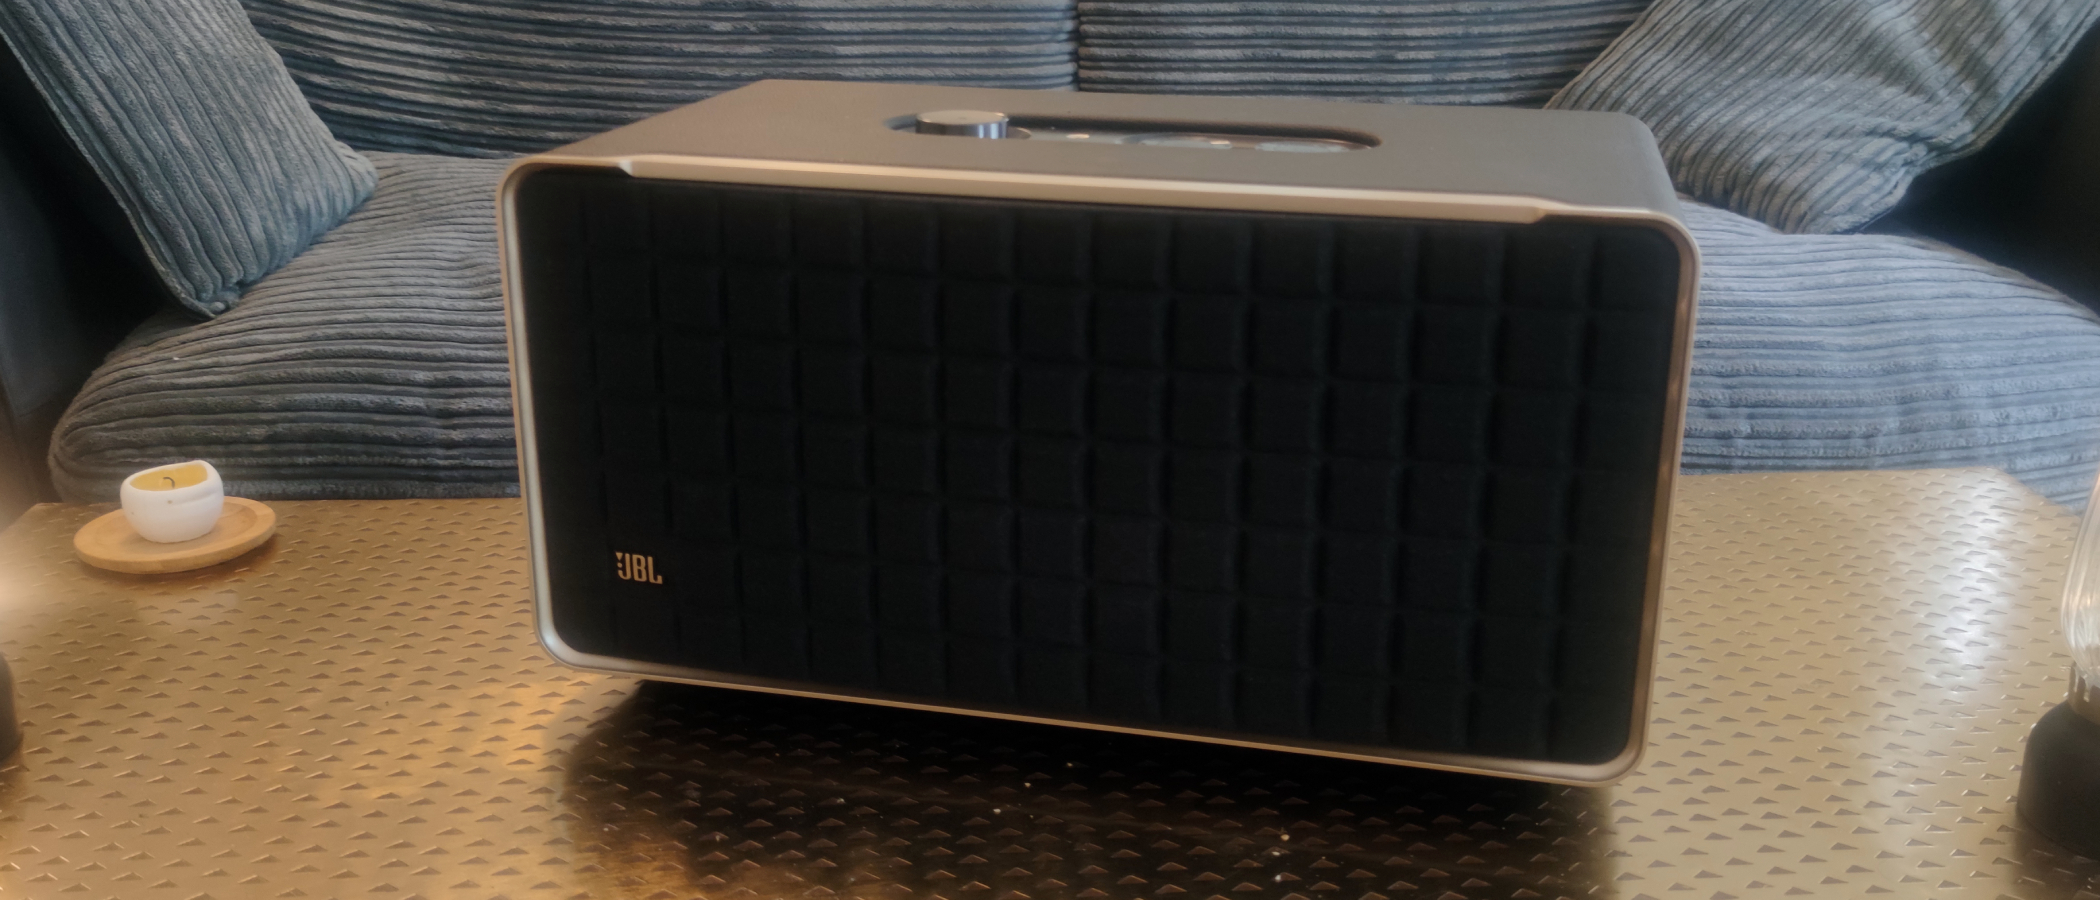 [Toller Service zum Sonderpreis!] JBL Authentics 500 review: with a speaker rock TechRadar off | chops Dolby socks to Atmos your